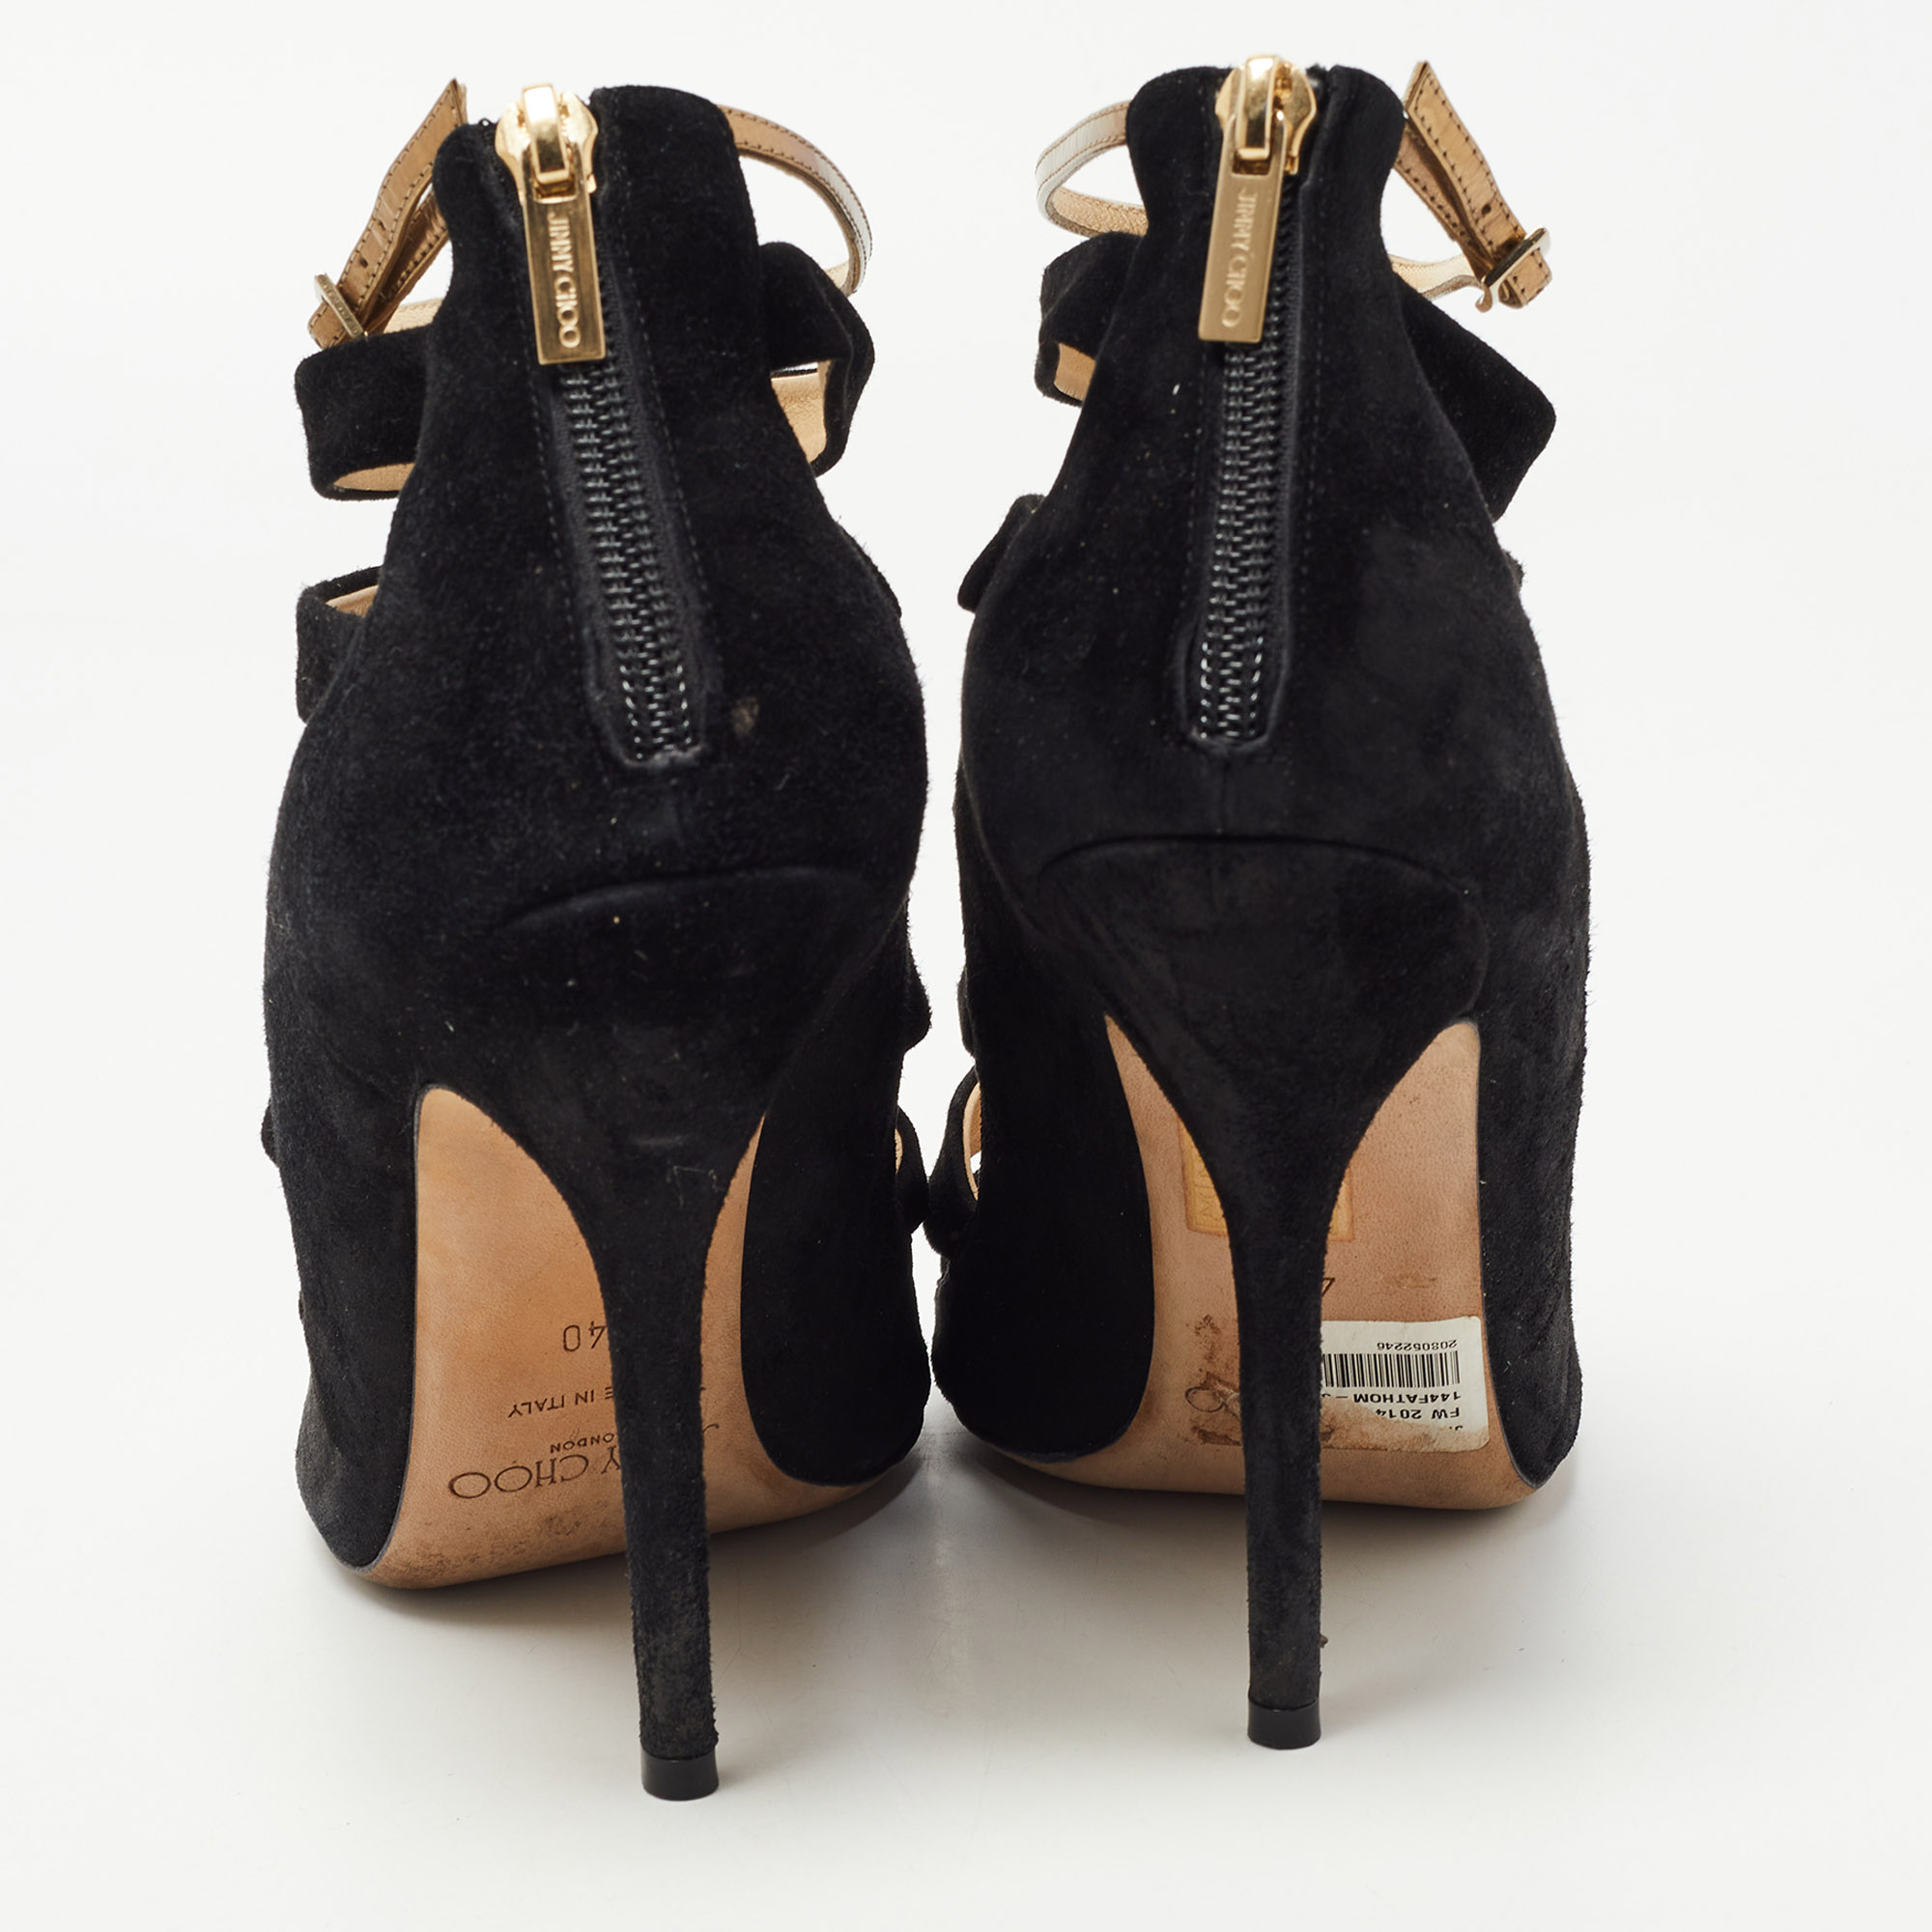 Jimmy Choo Black Suede Cage Sandals Size 40